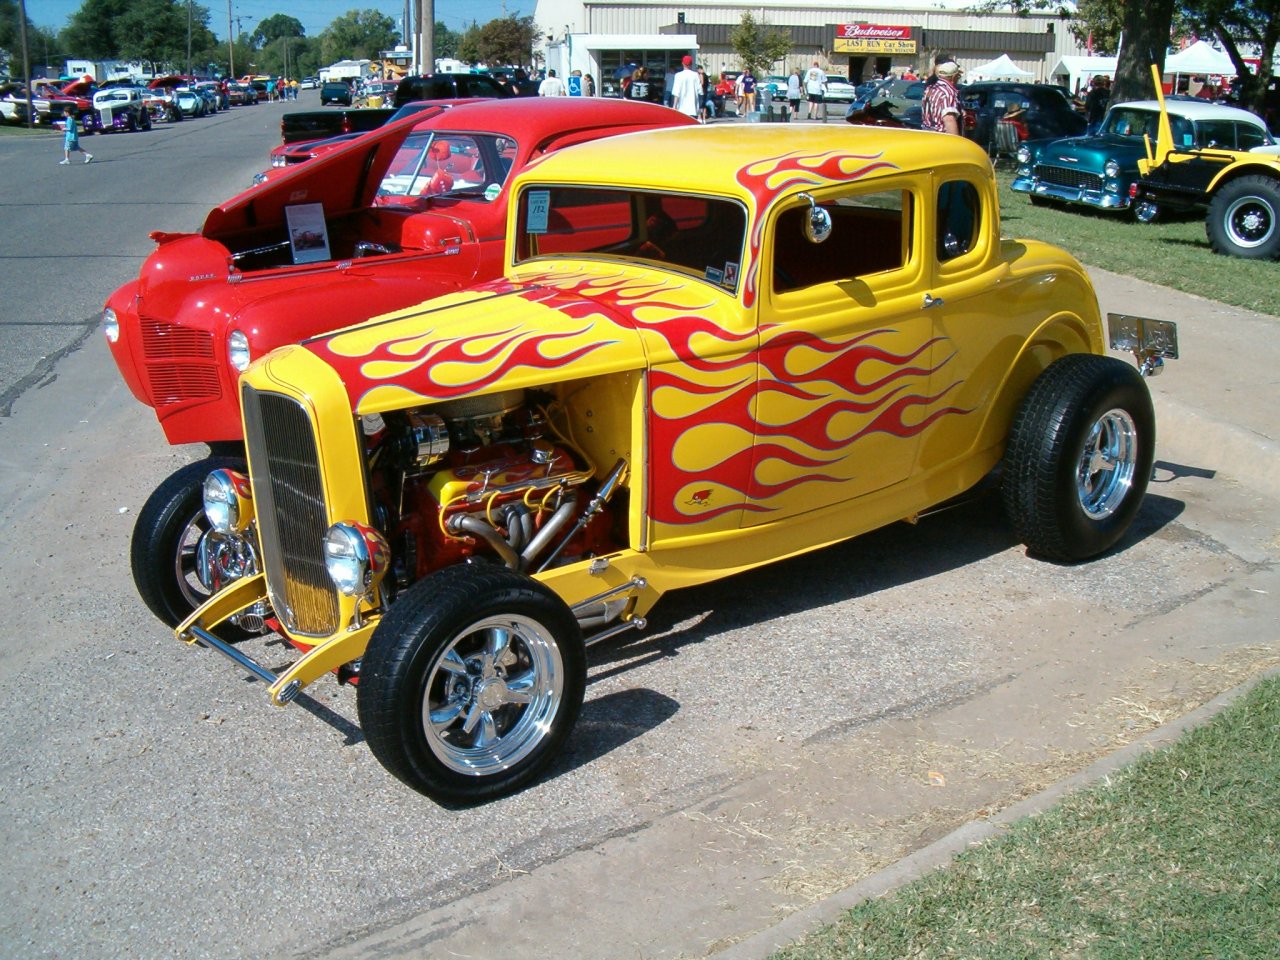 Yellow with flames